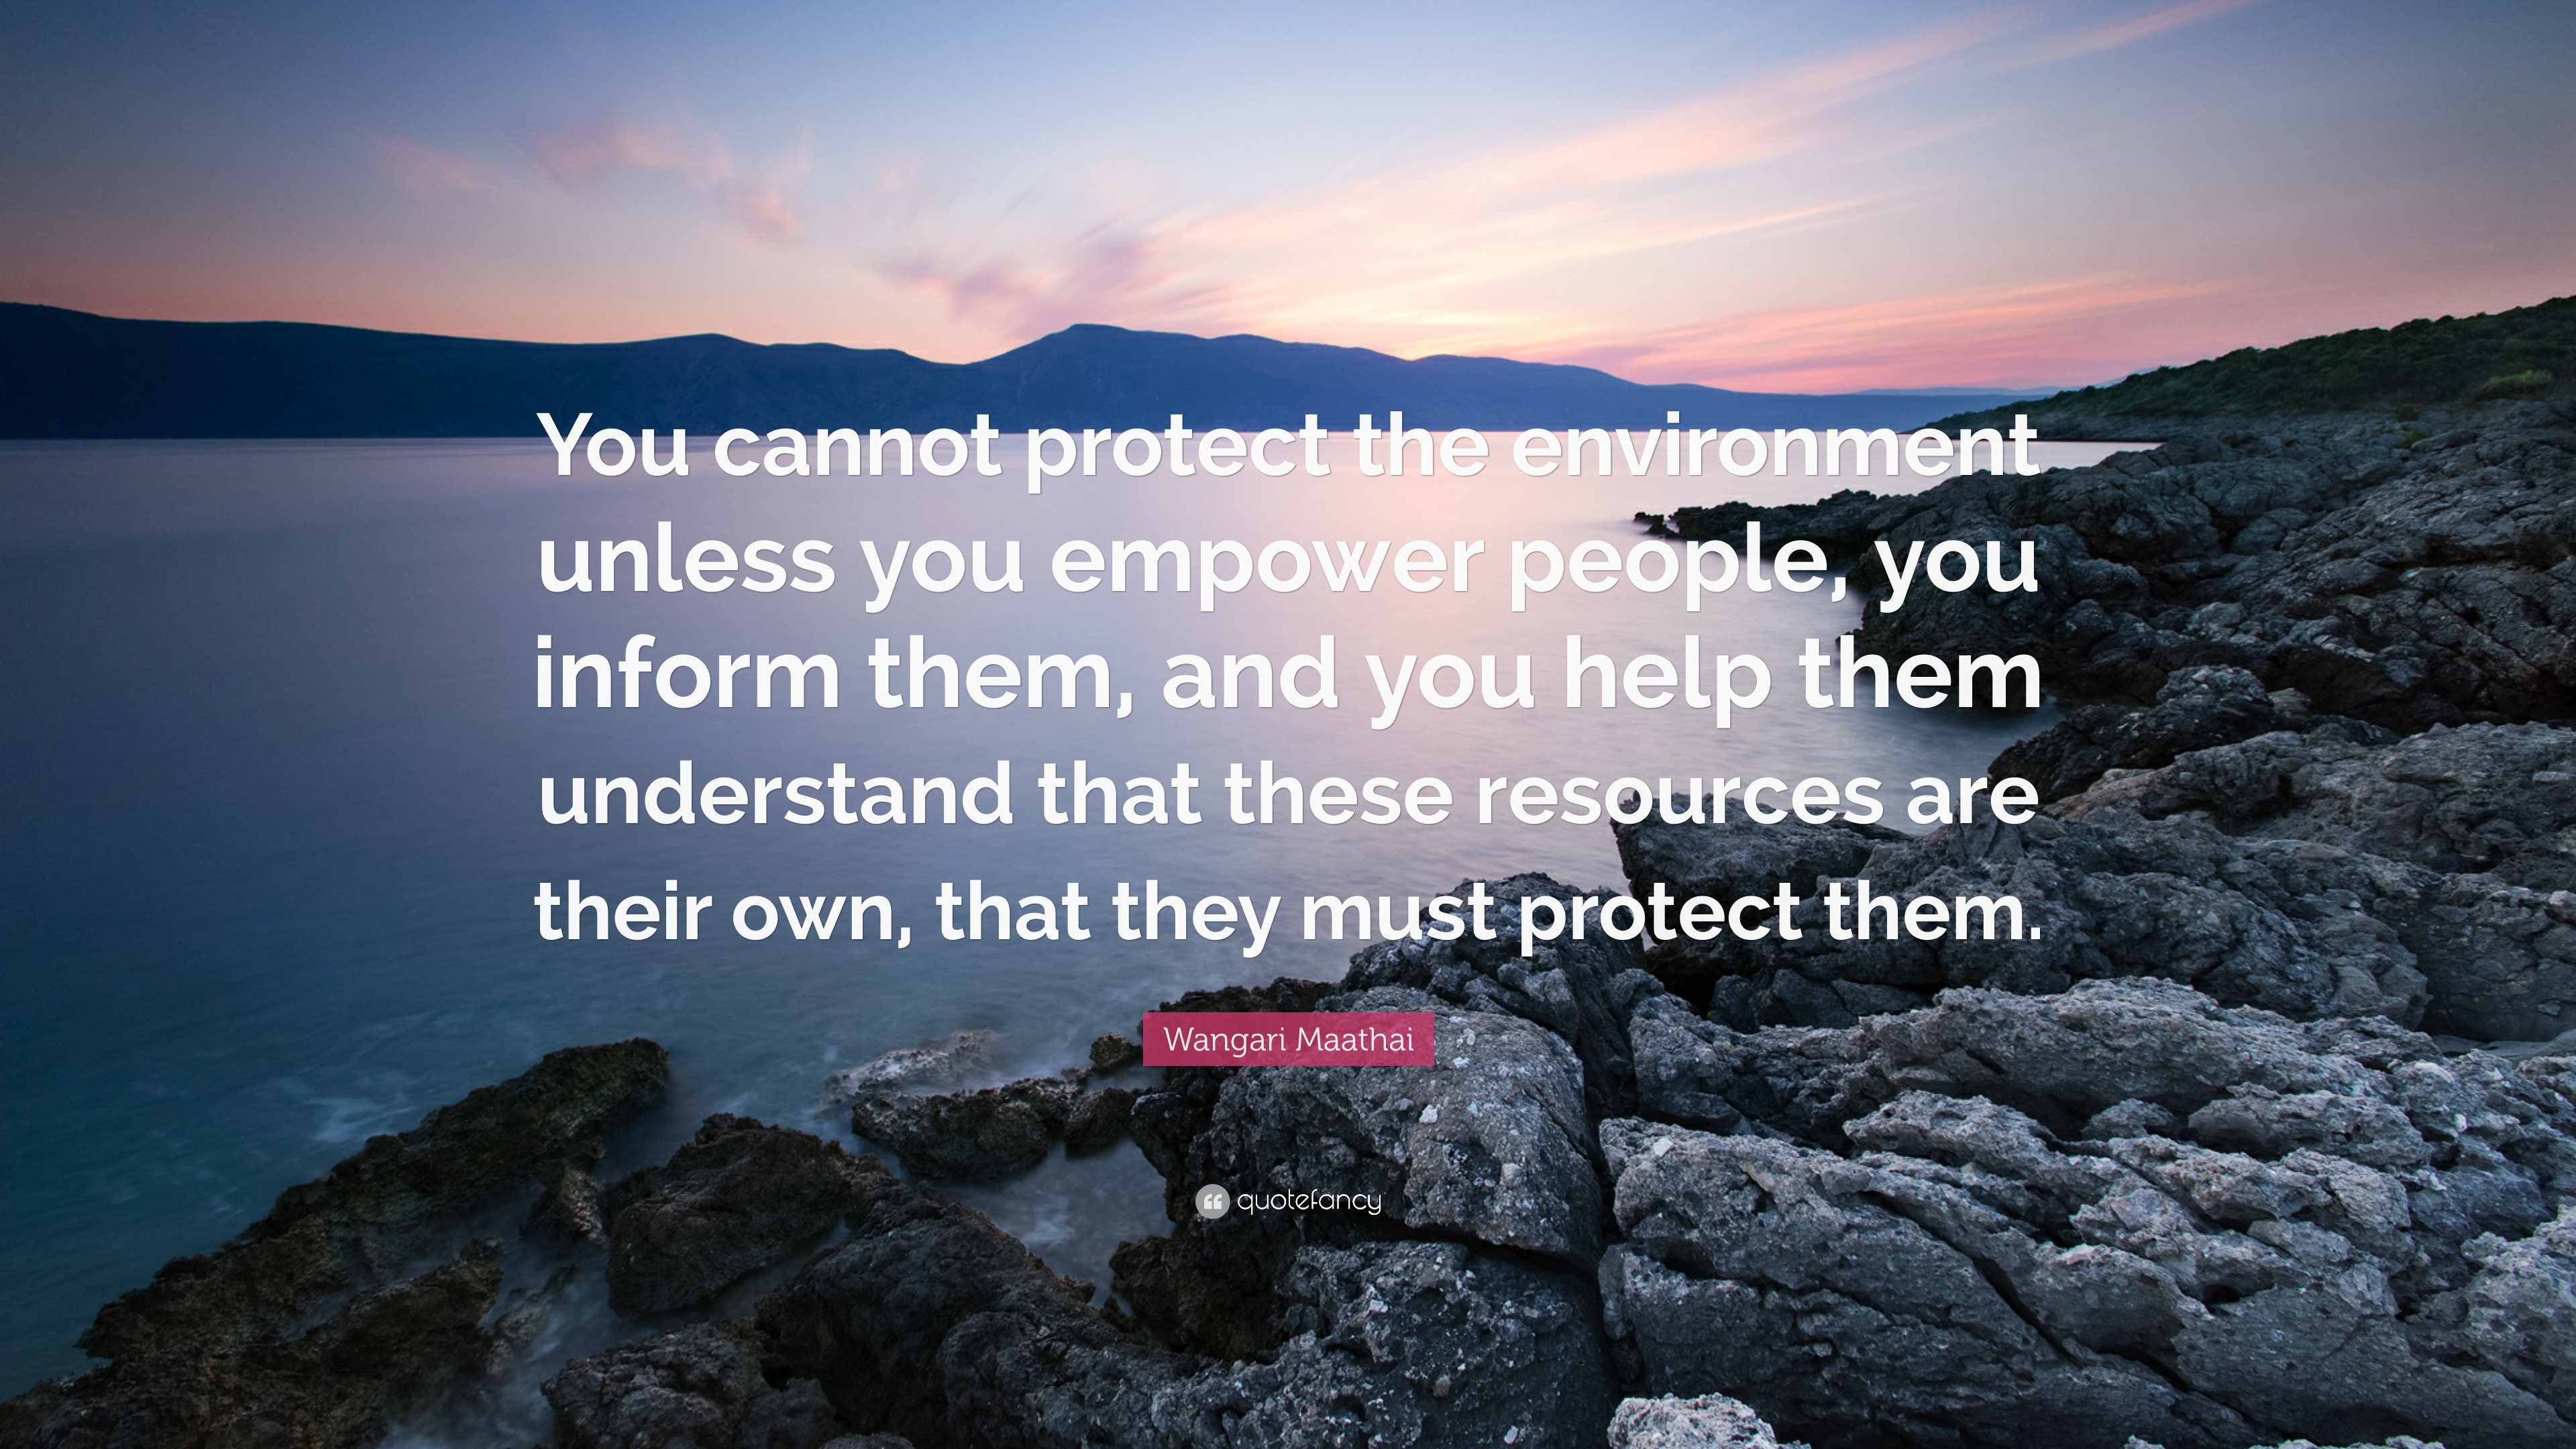 Wangari Maathai Quote: “You cannot protect the environment unless you